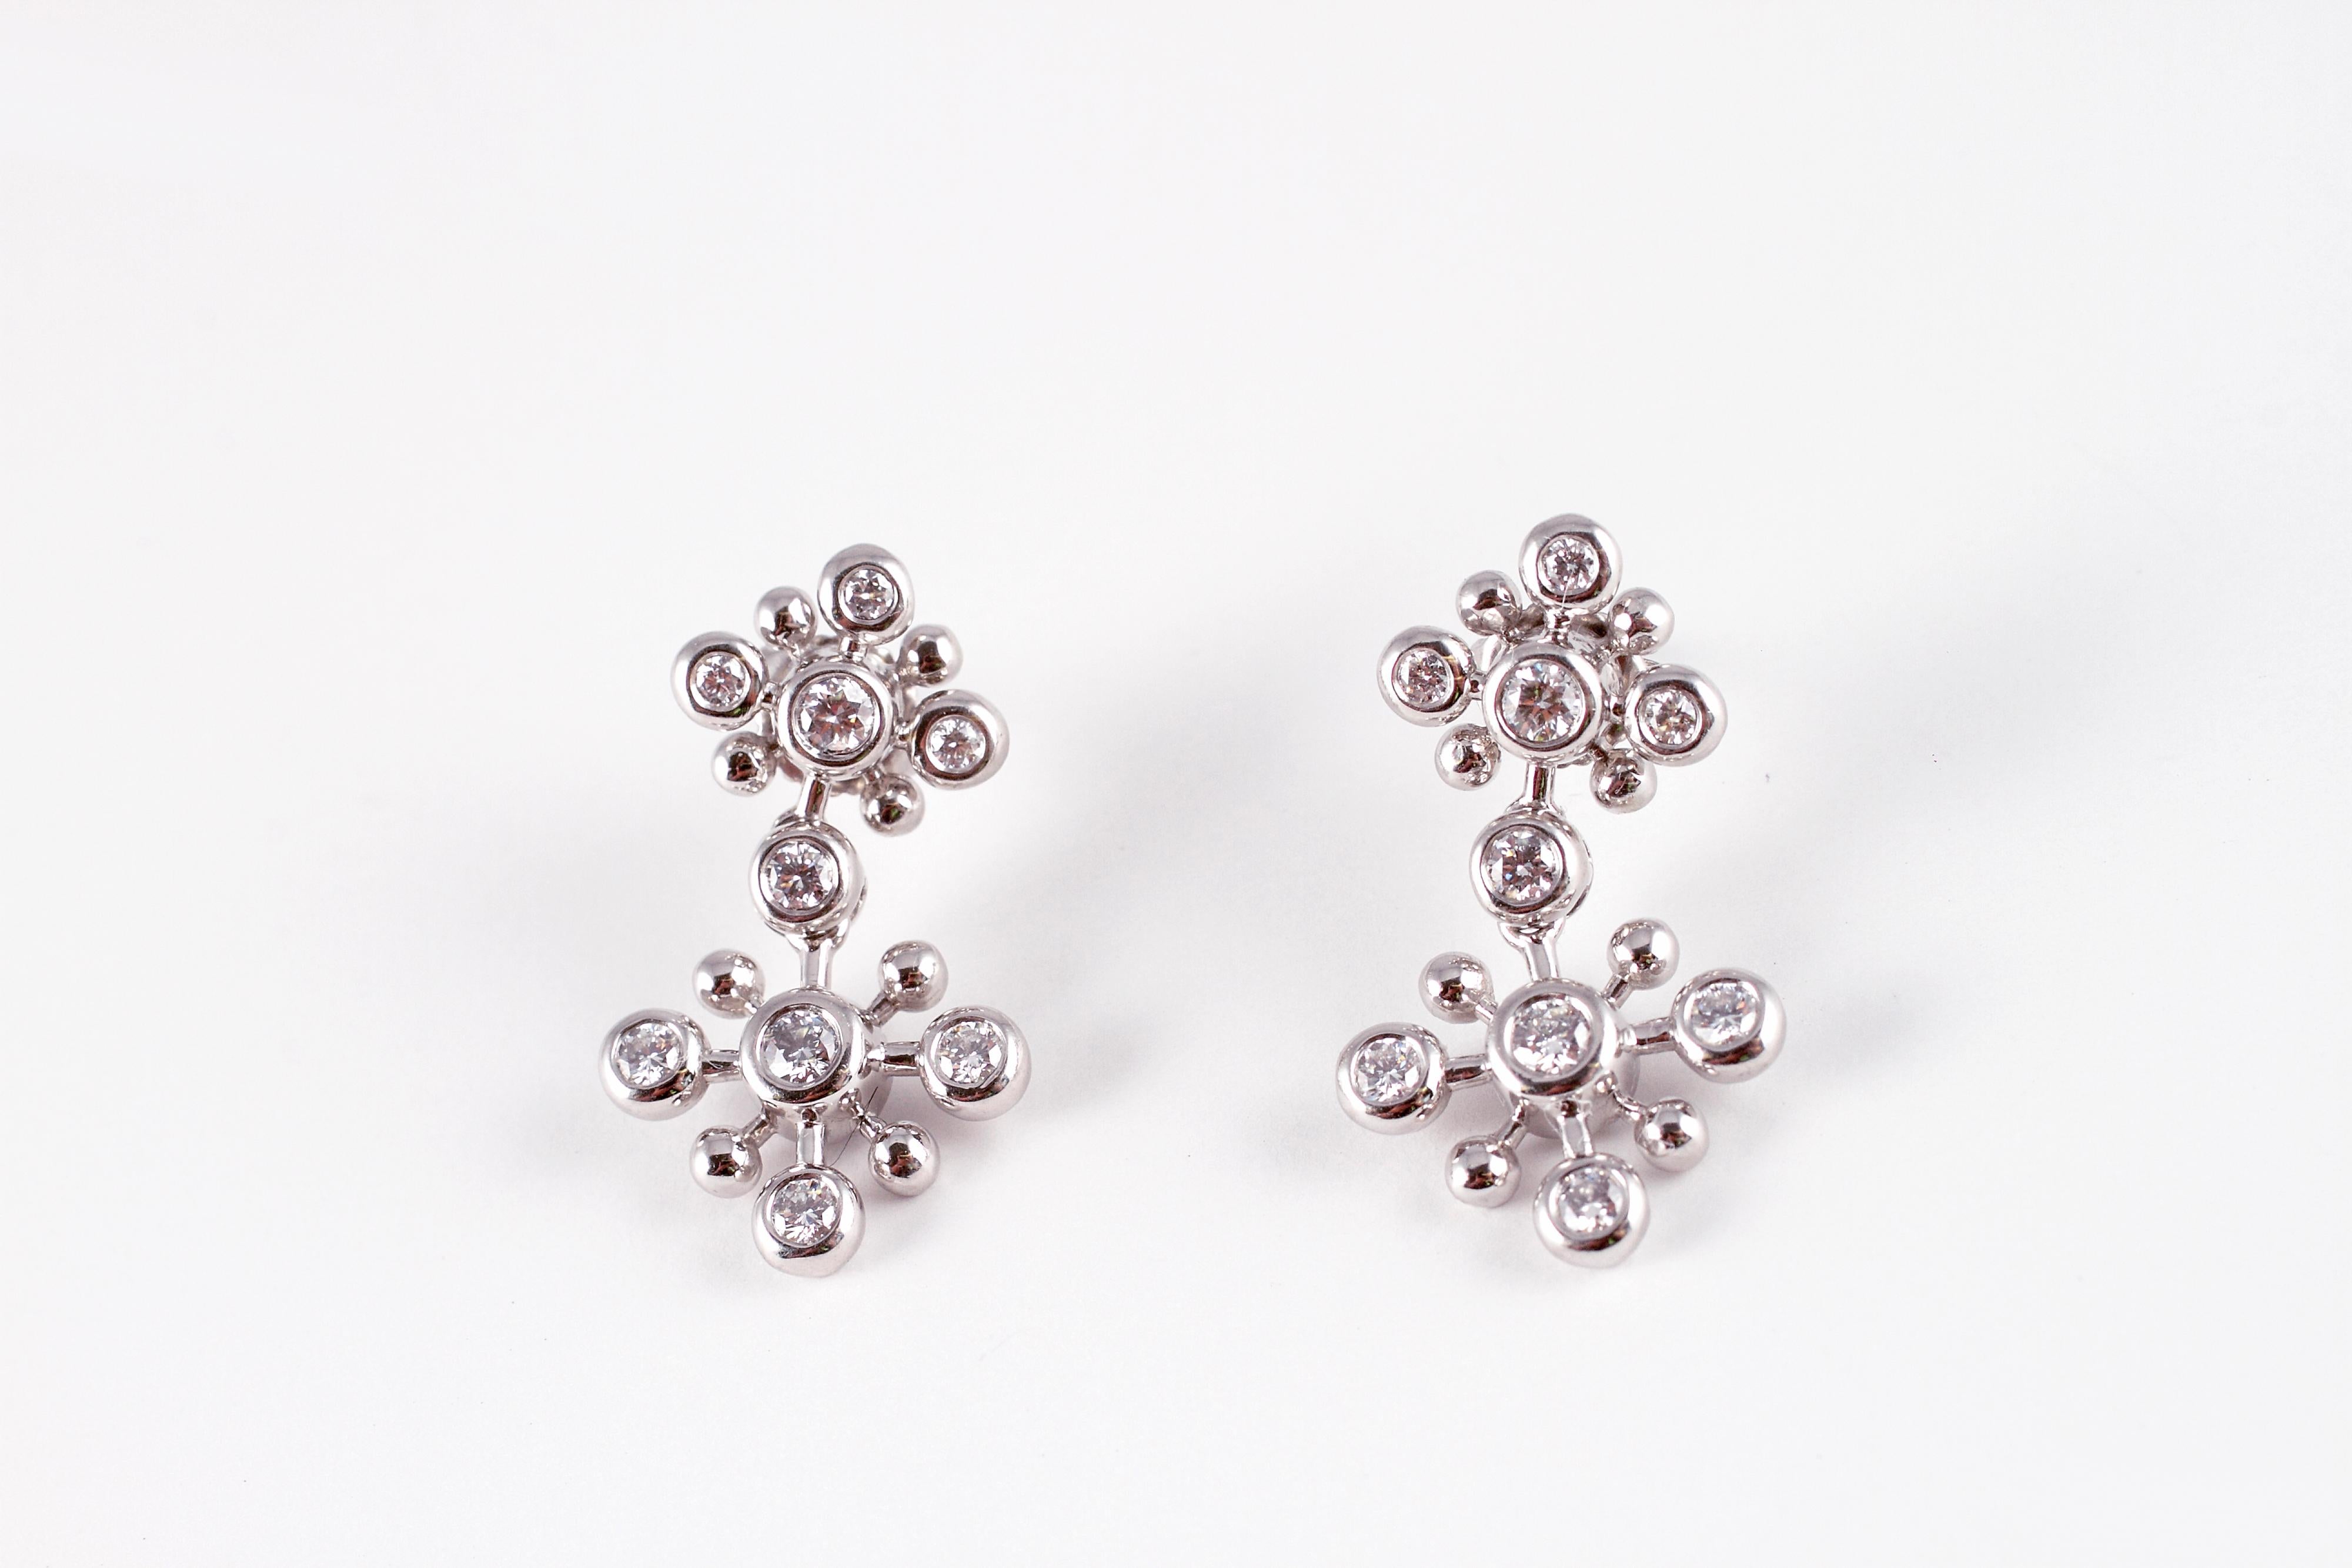 Celebrate winter with these 1.25 carat diamond earrings from the Tiffany & Co 